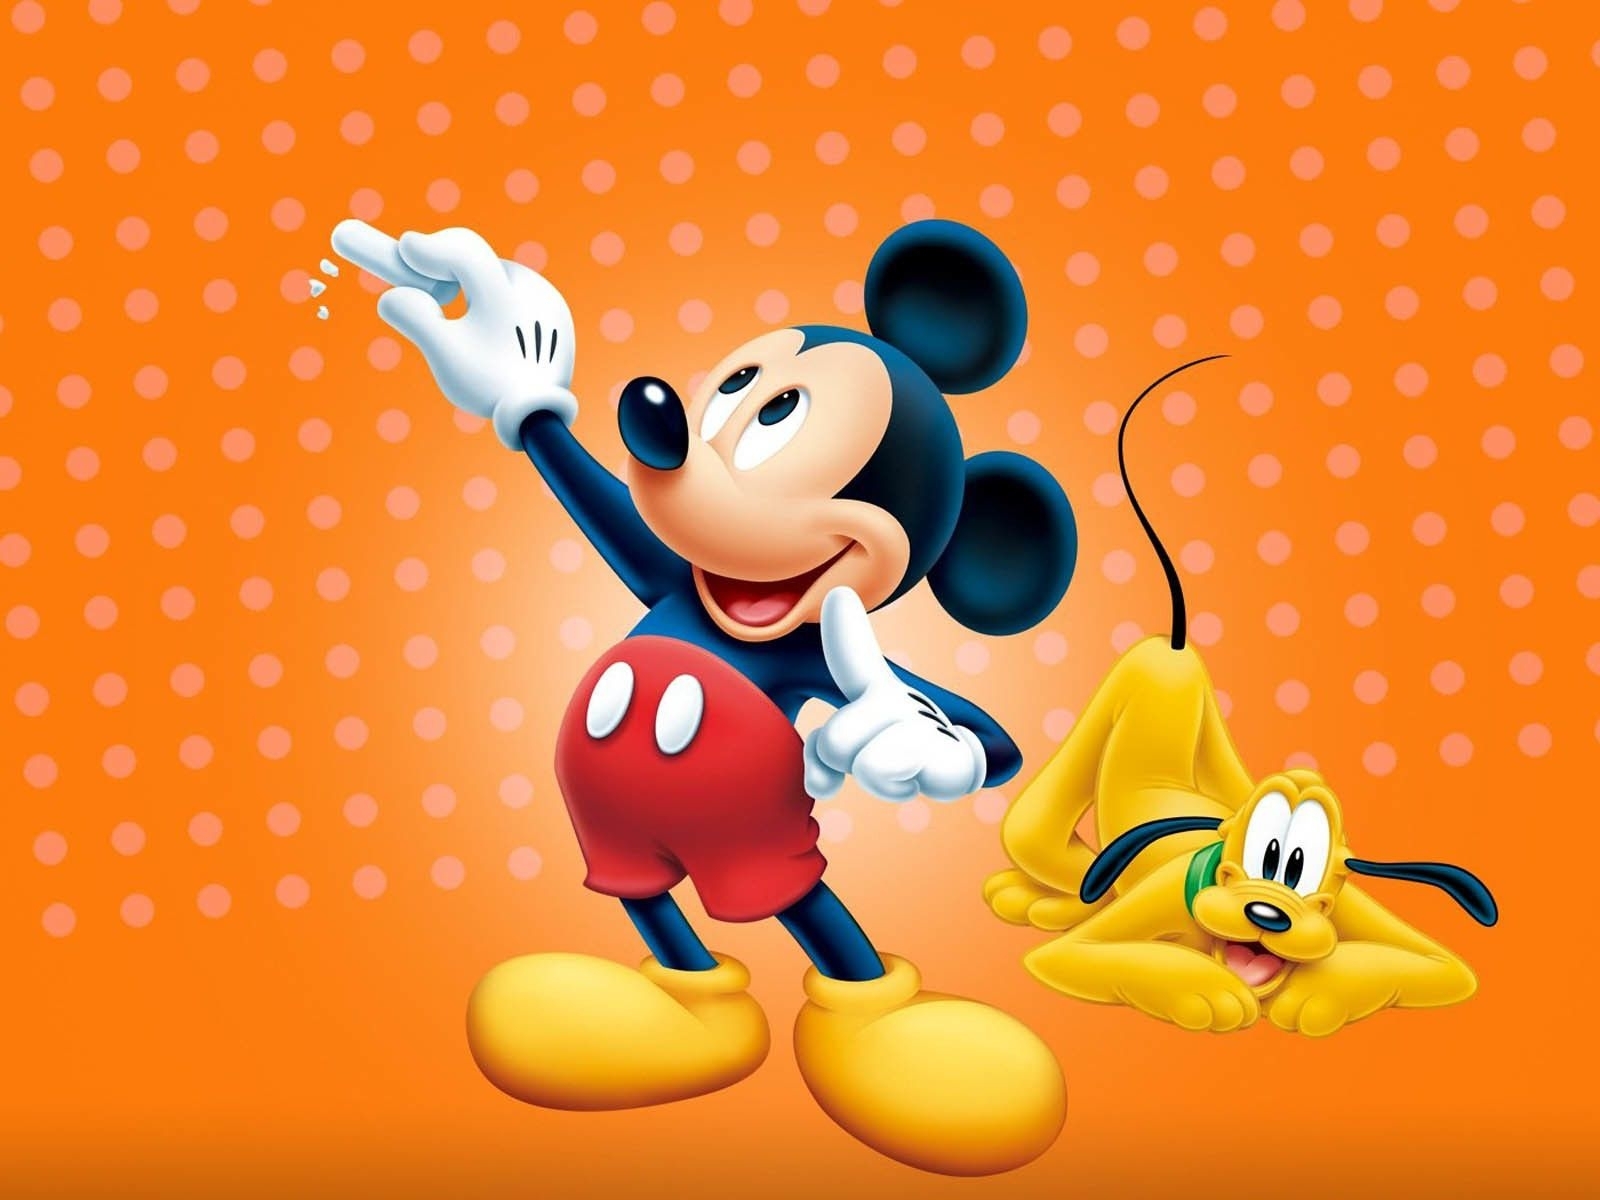 10 New Mickey Mouse Wallpaper Hd FULL HD 1080p For PC ...